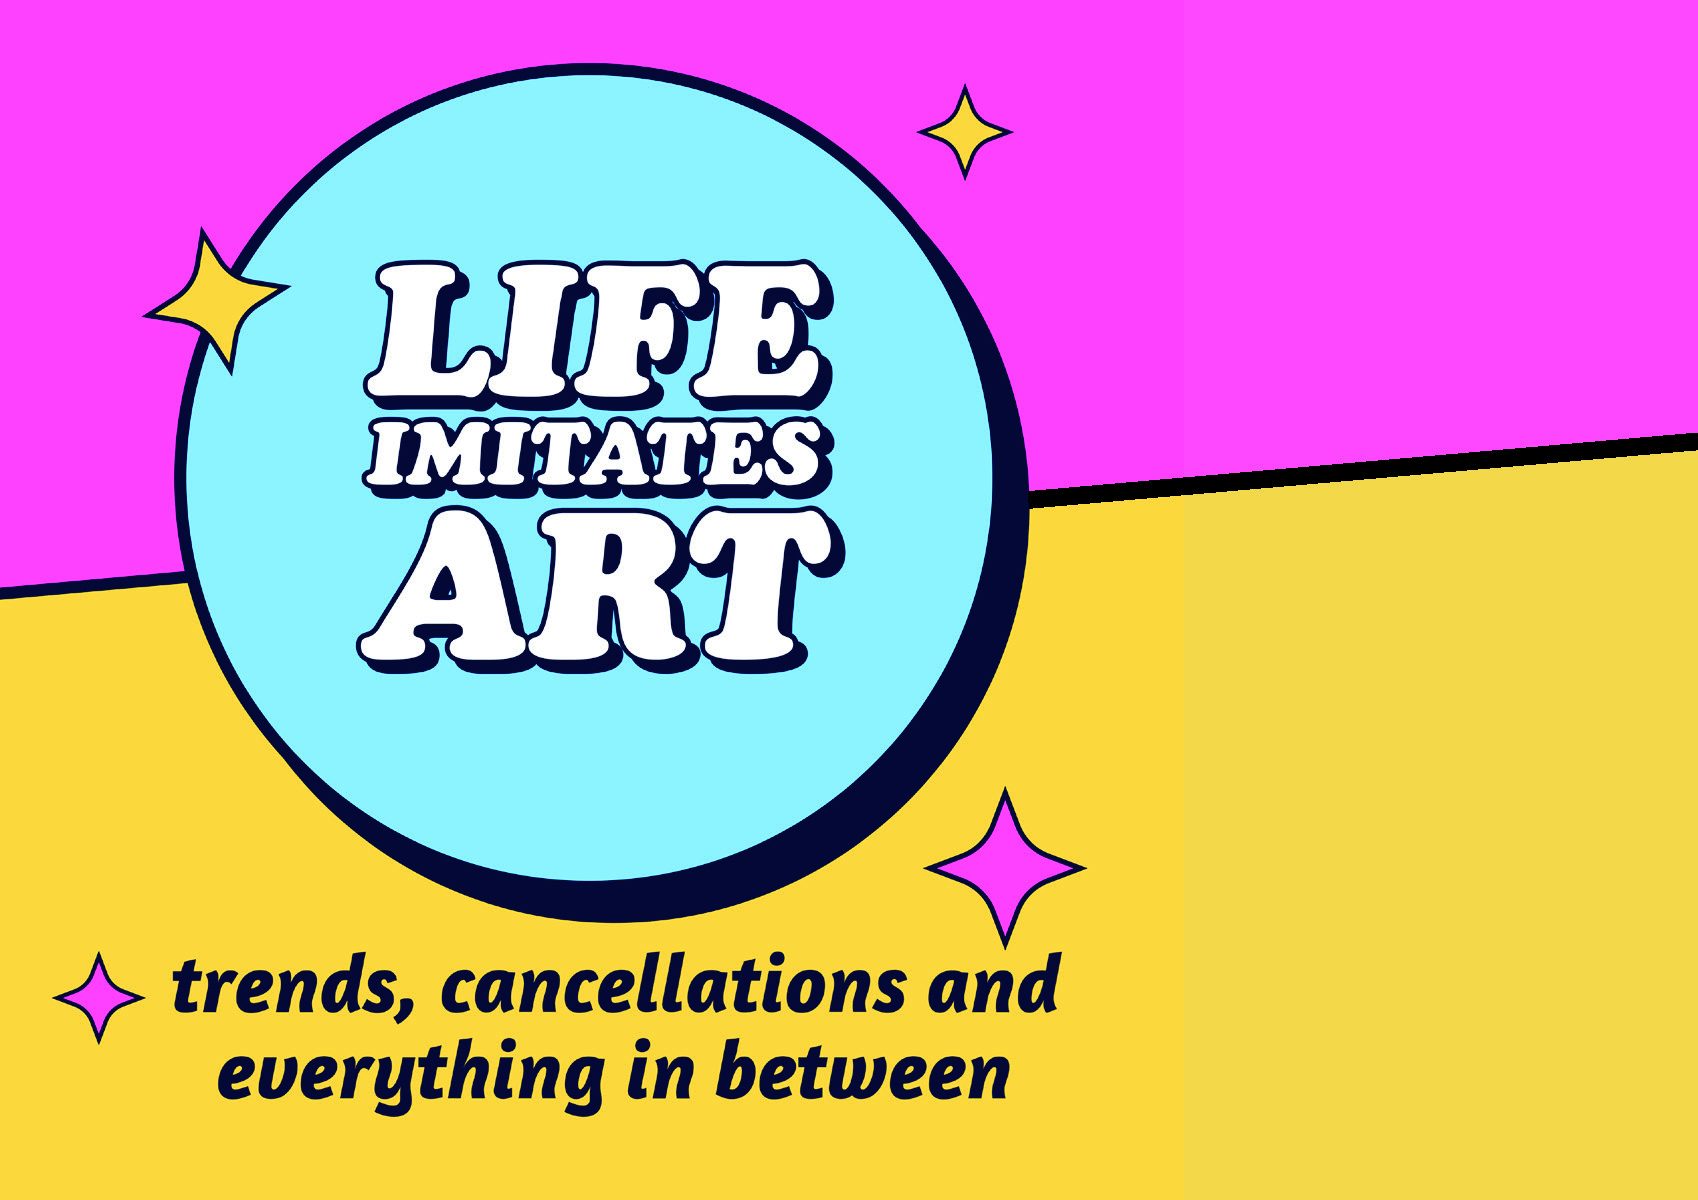 LIFE IMITATES ART is a monthly arts opinion column written by The Rubicon opinions editor Eliza Farley. (Illustration created using Adobe Express)